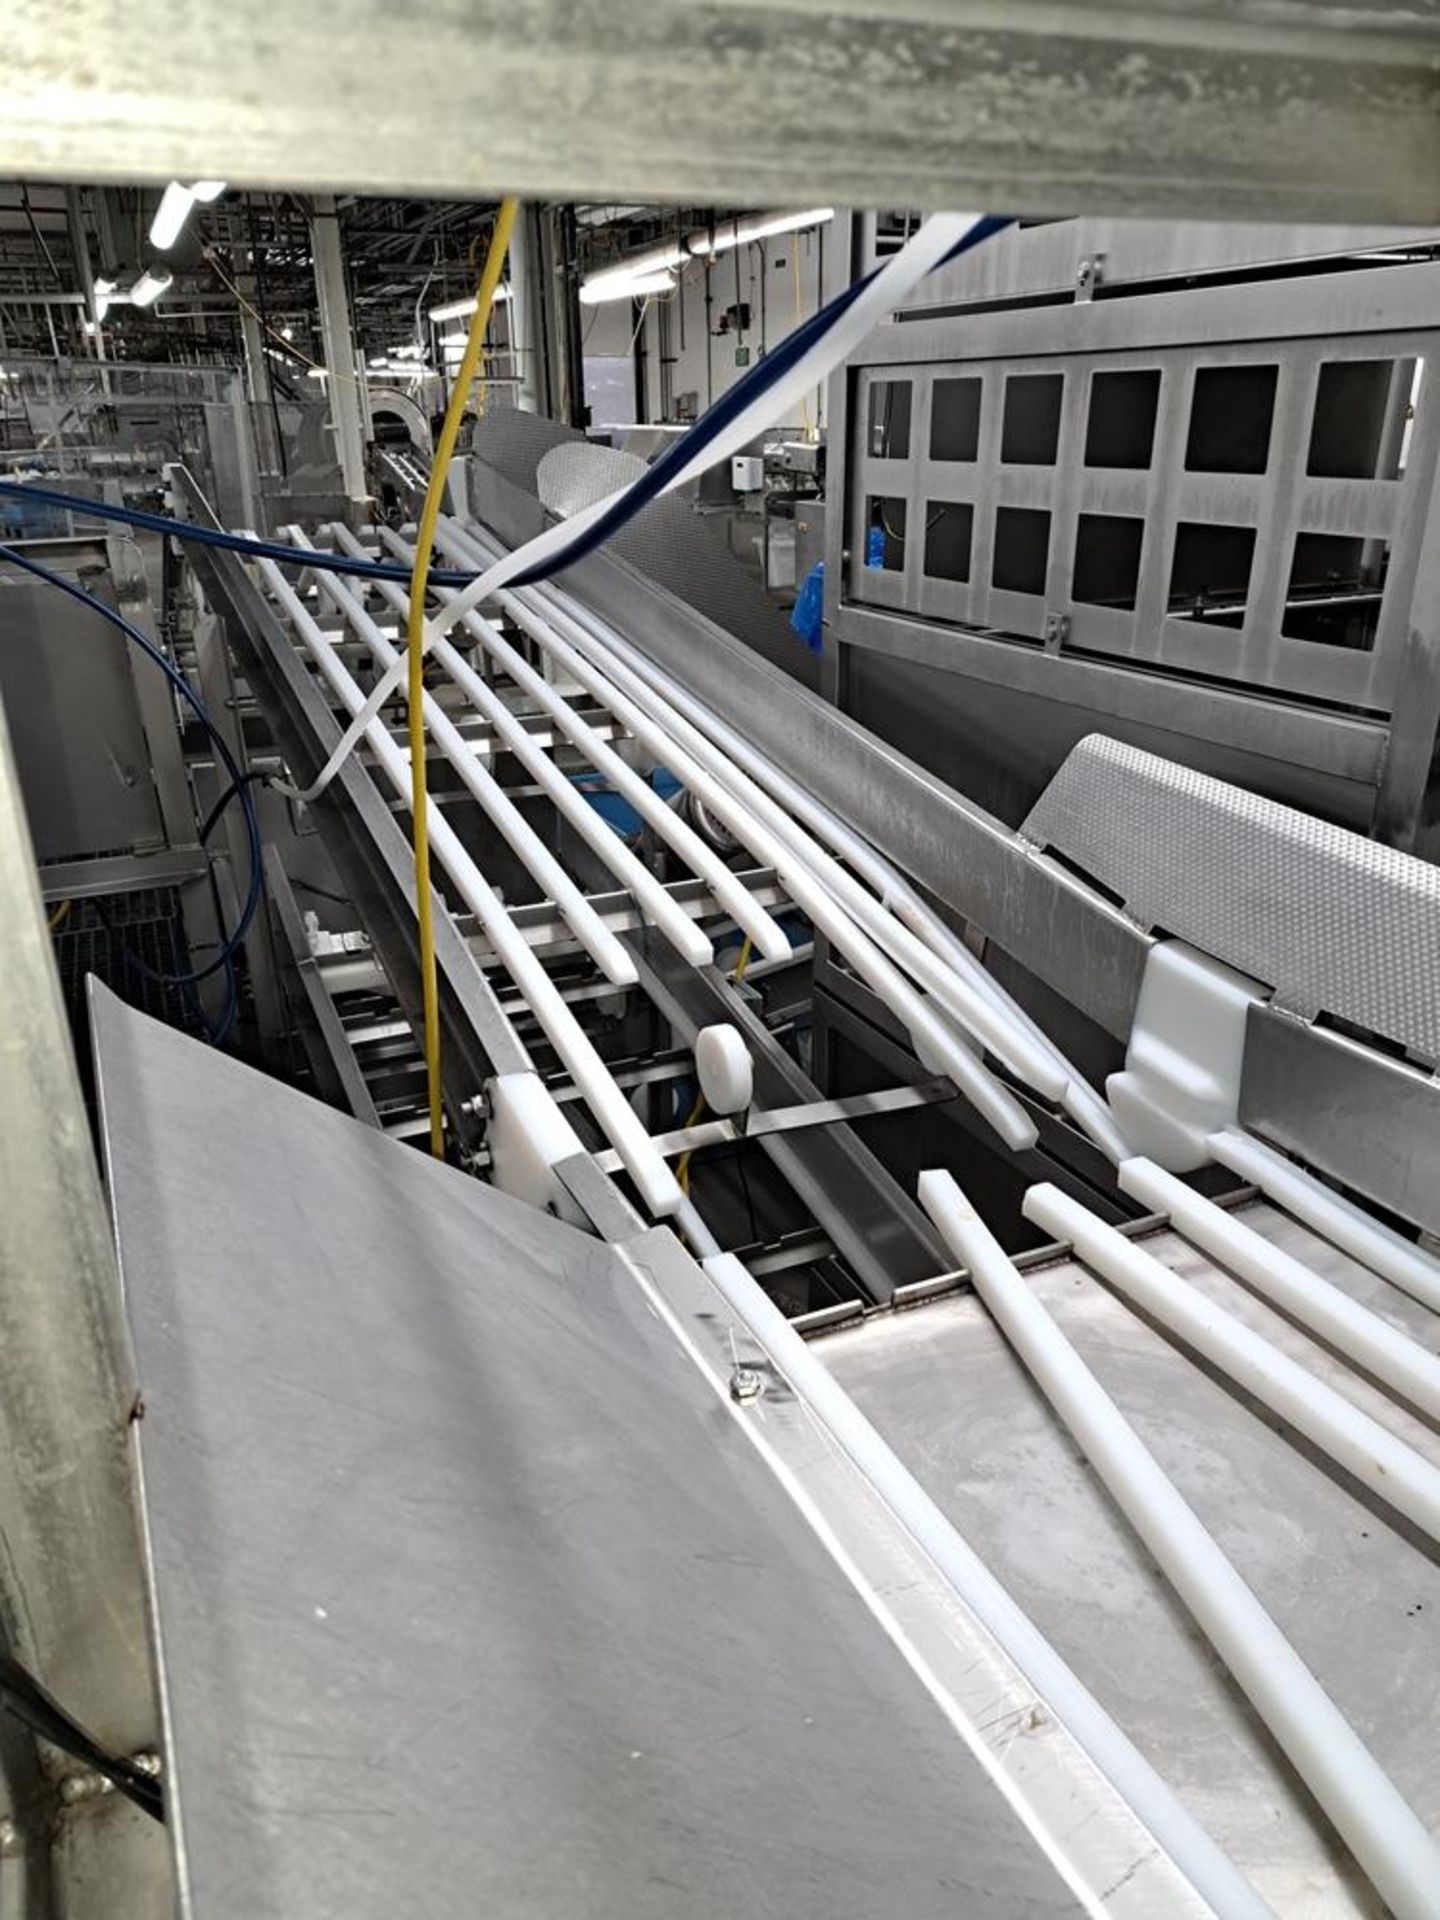 Stainless Steel Double Incline Conveyor, 24" W X 17' L, bottom conveyor, 24" W X 23' L top conveyor, - Image 6 of 6